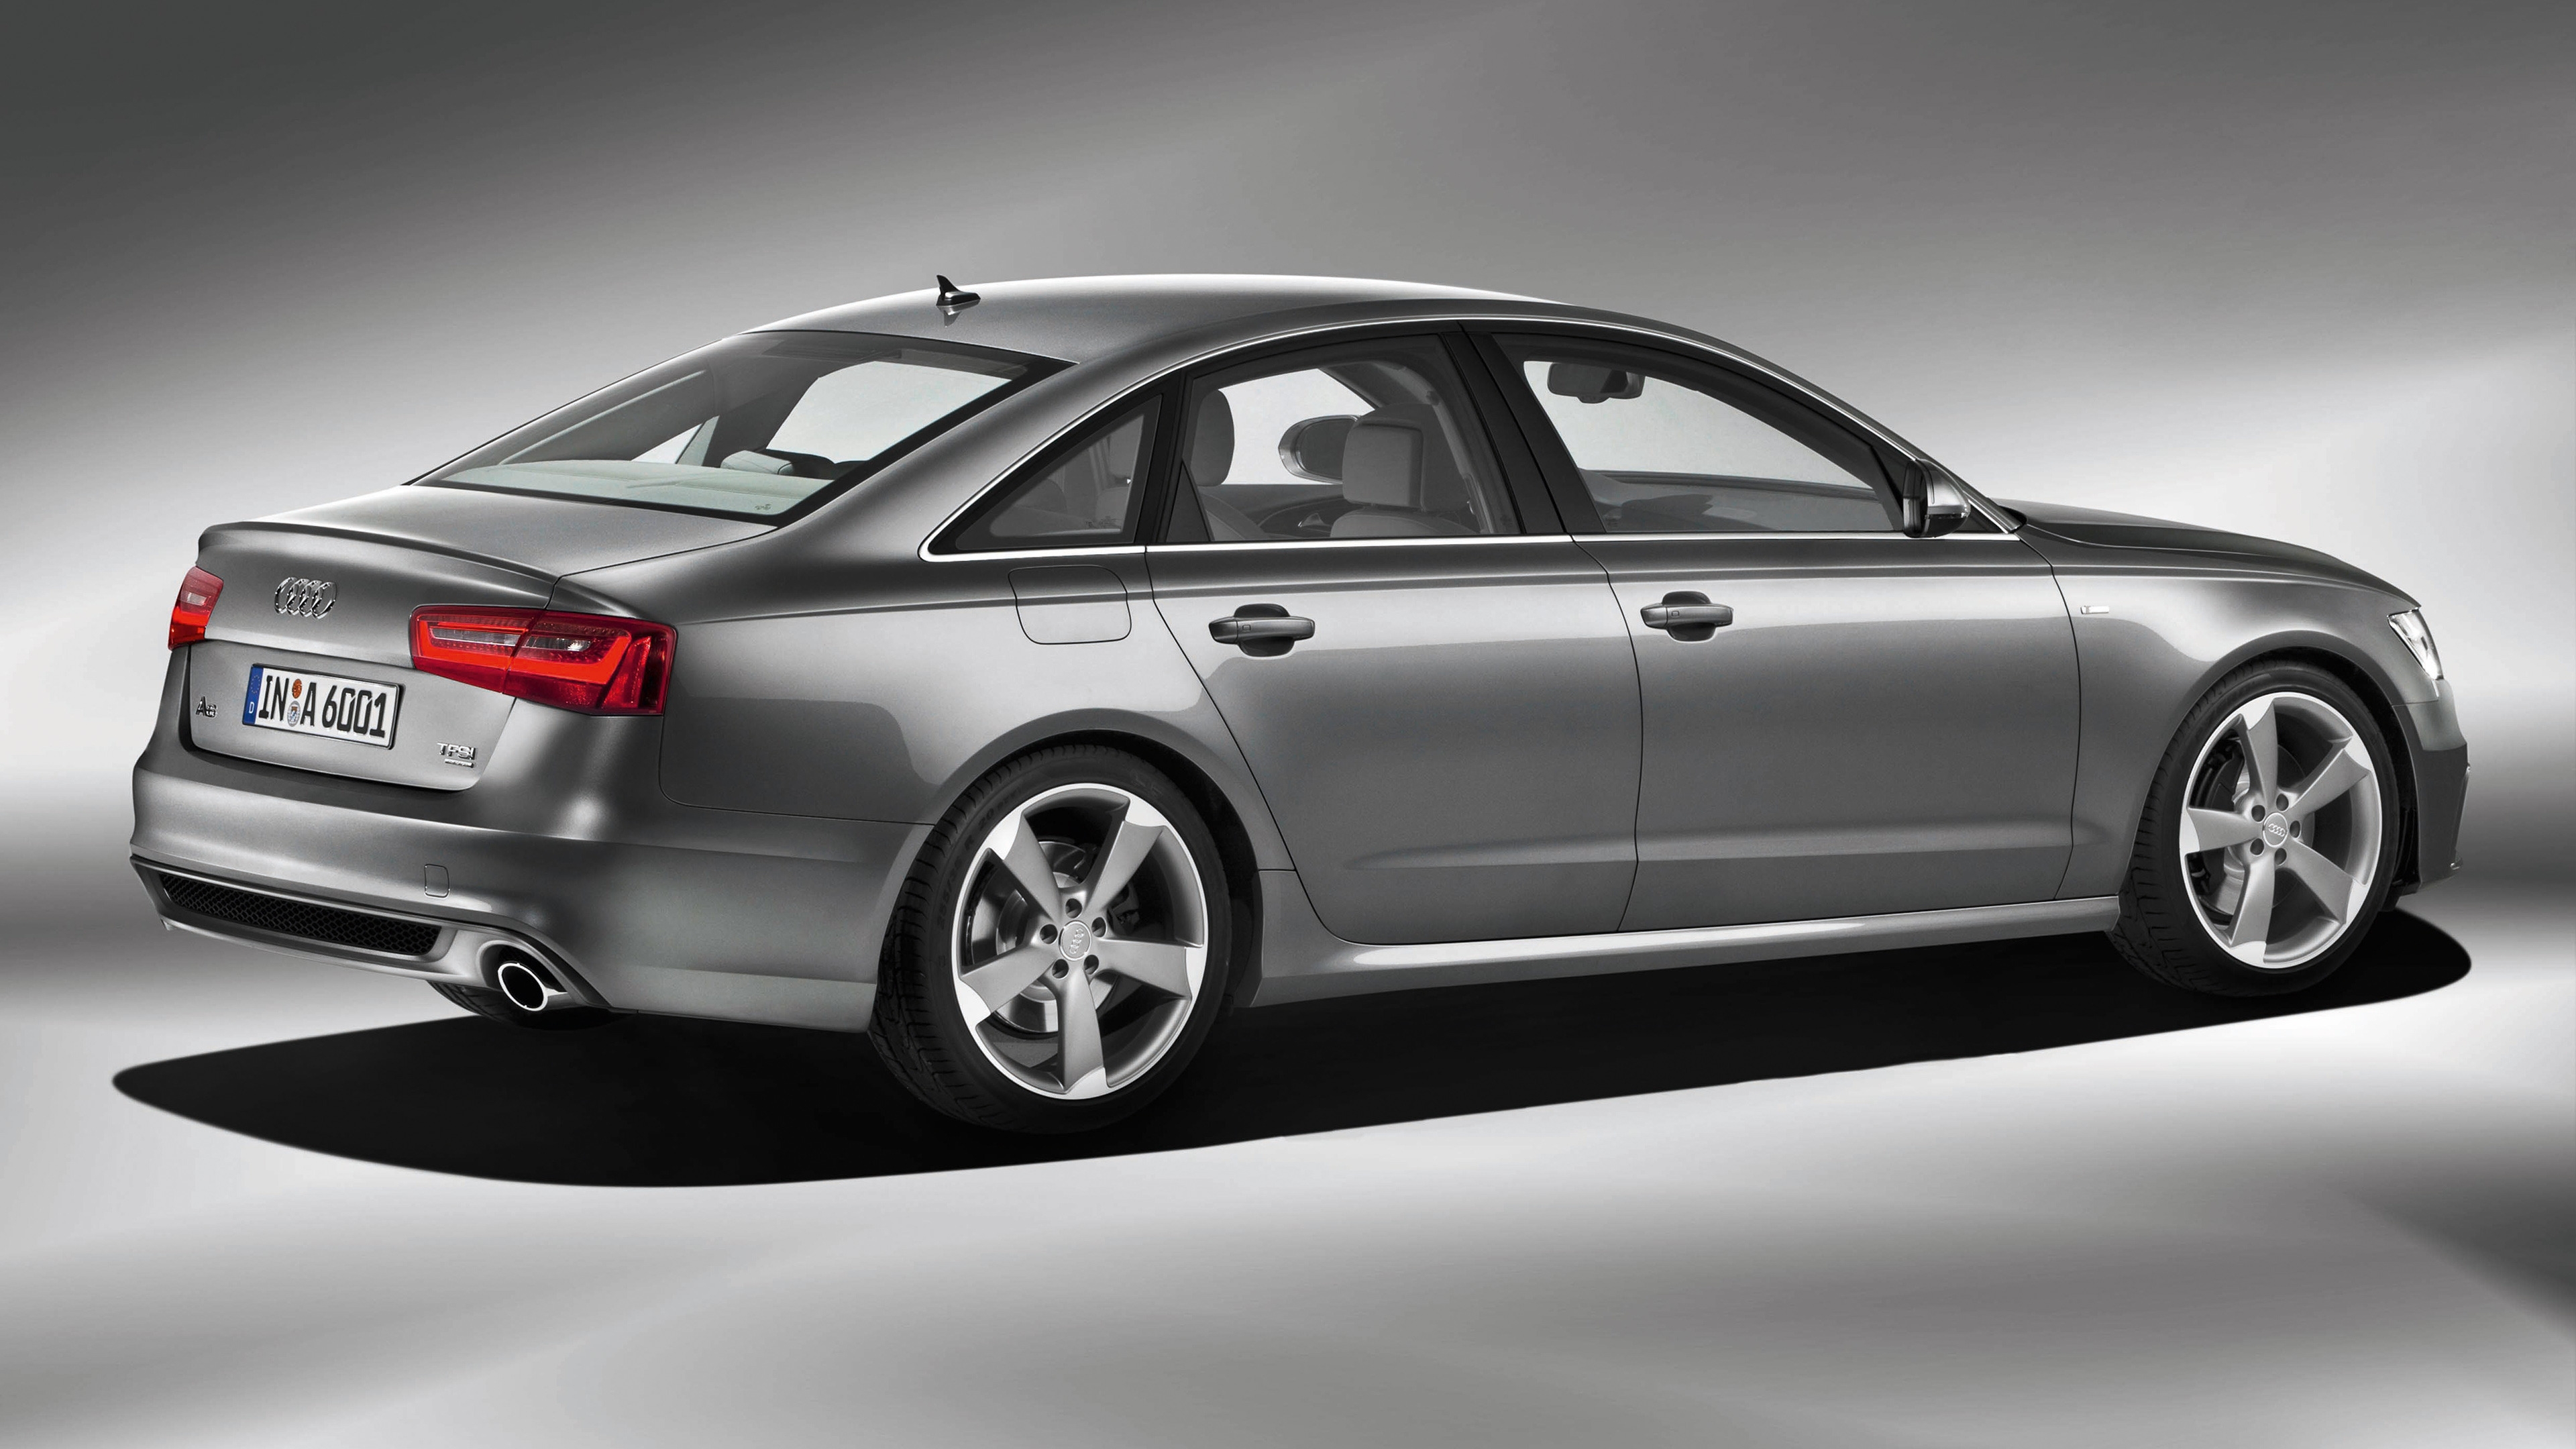 Audi A6 2012 for 3840 x 2160 Ultra HD resolution